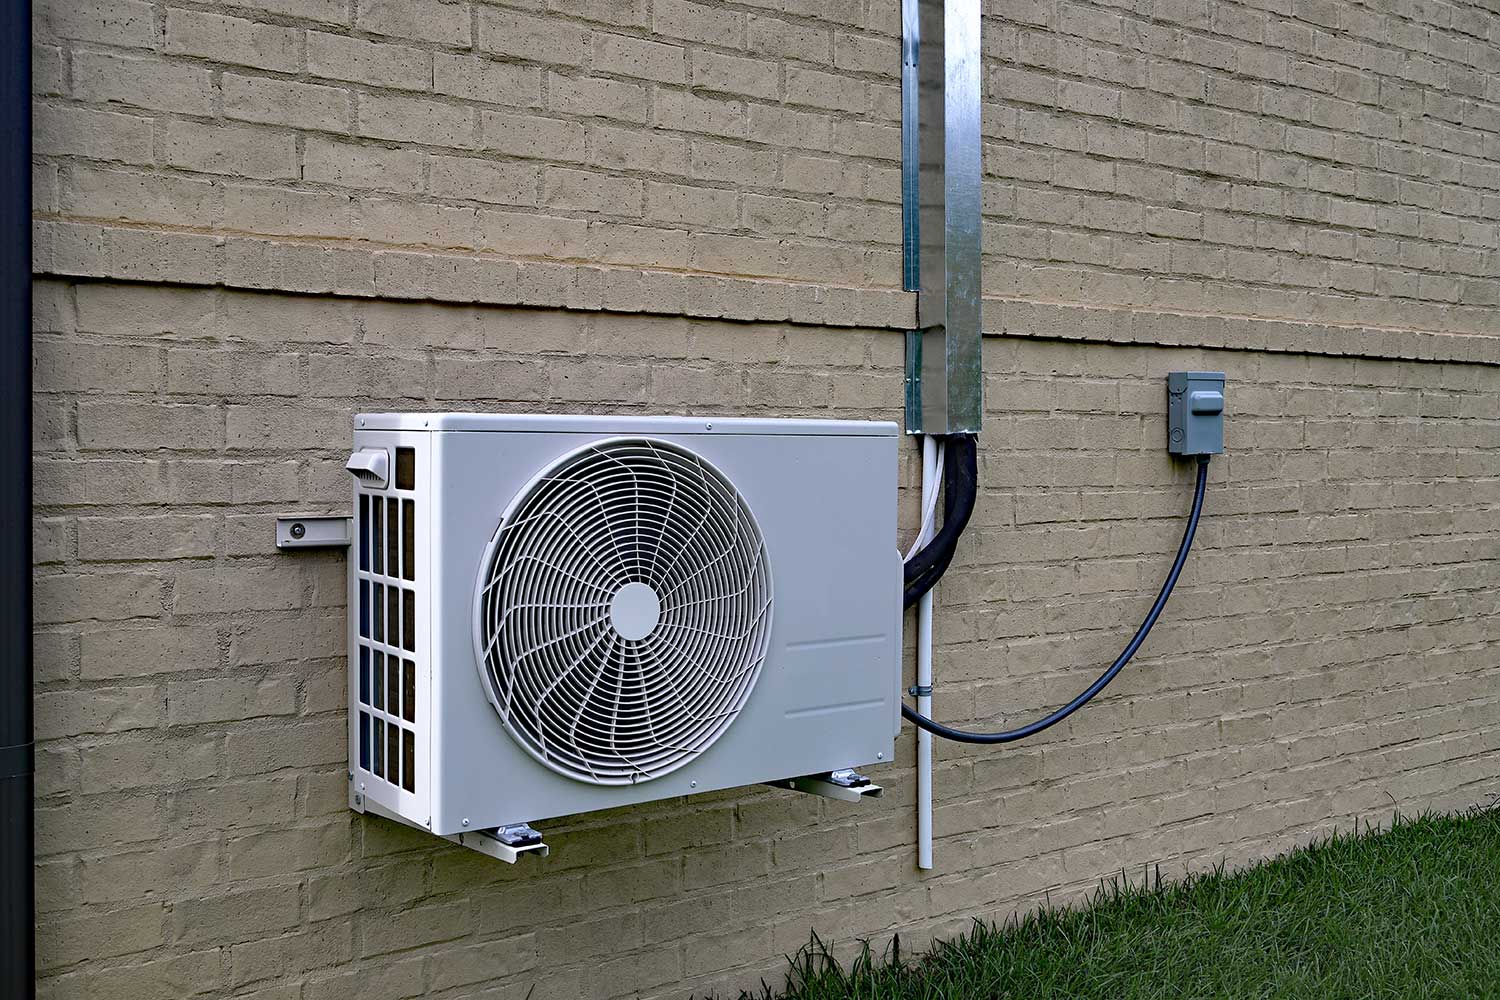 There is a good Heating and Air Conditioning specialist in our city